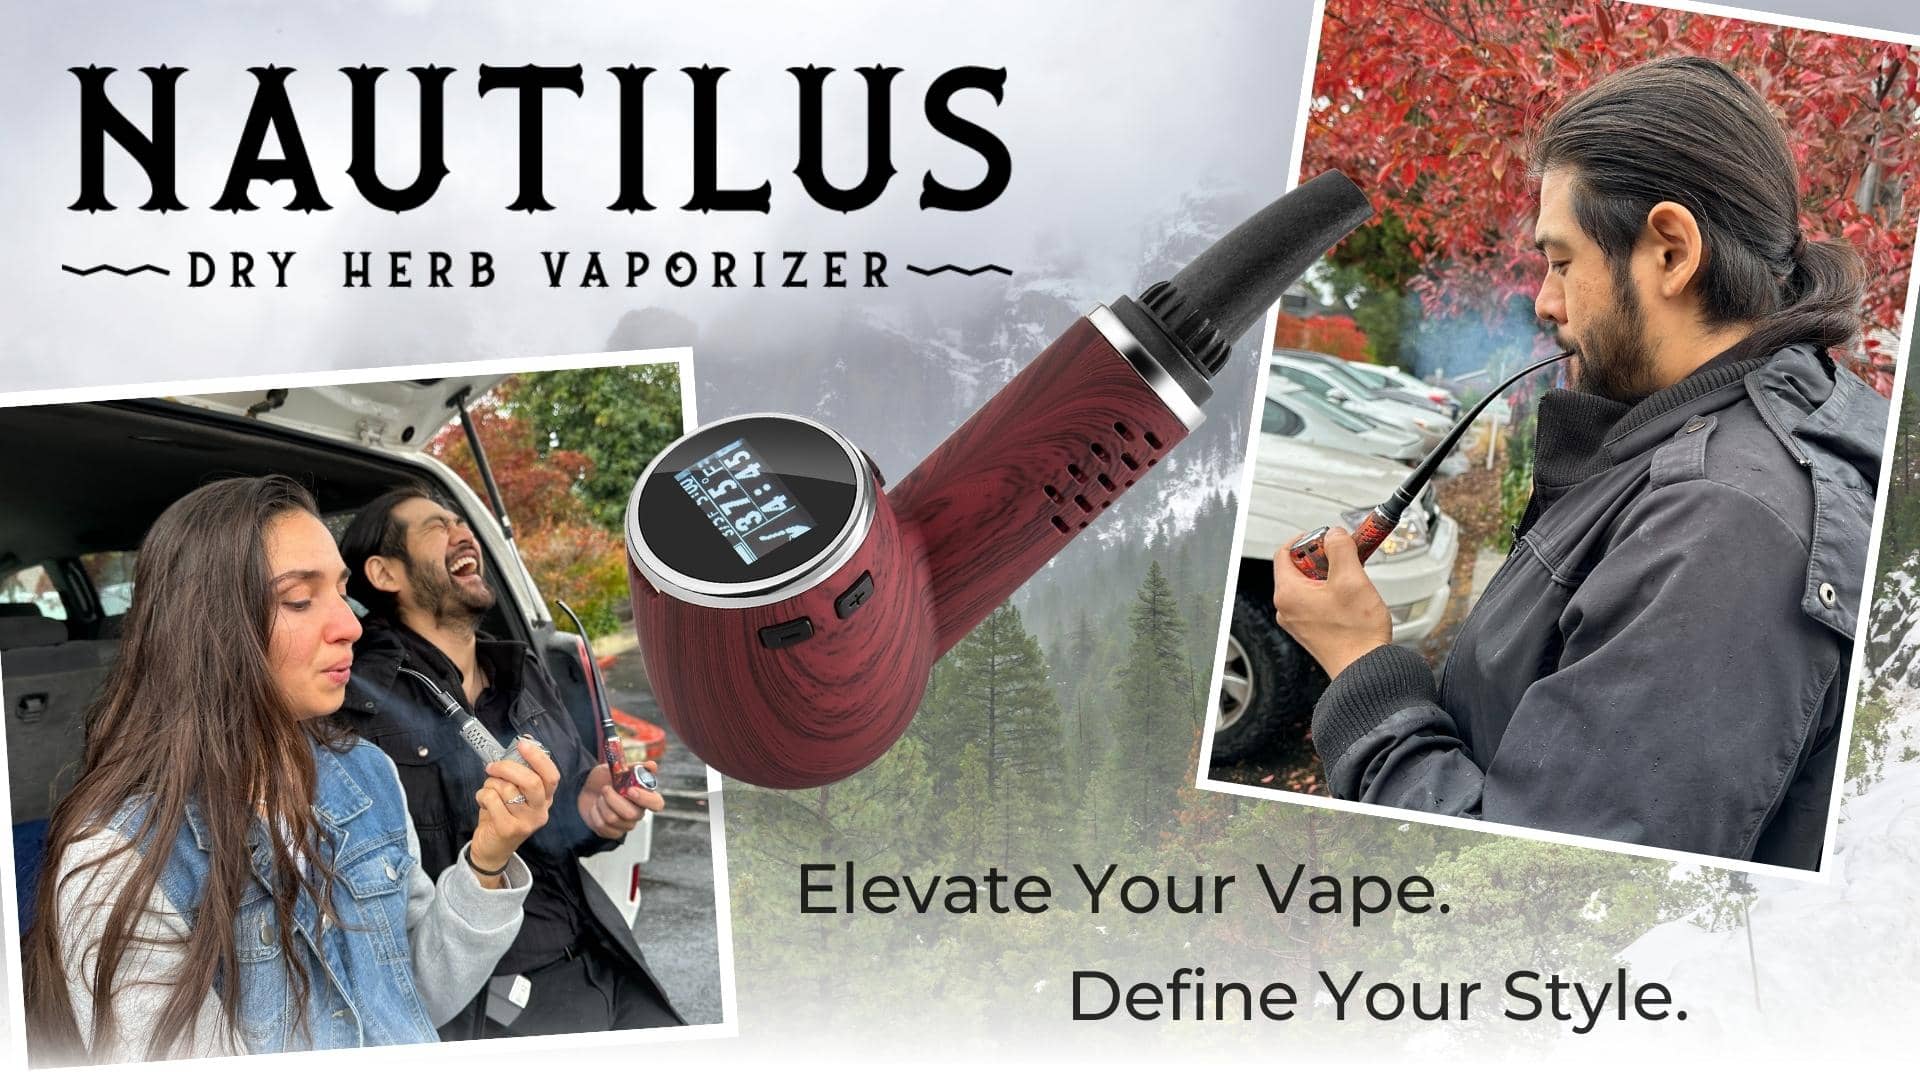 Cipher Nautilus Dry Herb Vaporizer for people that want to have fun vaporizing their flower